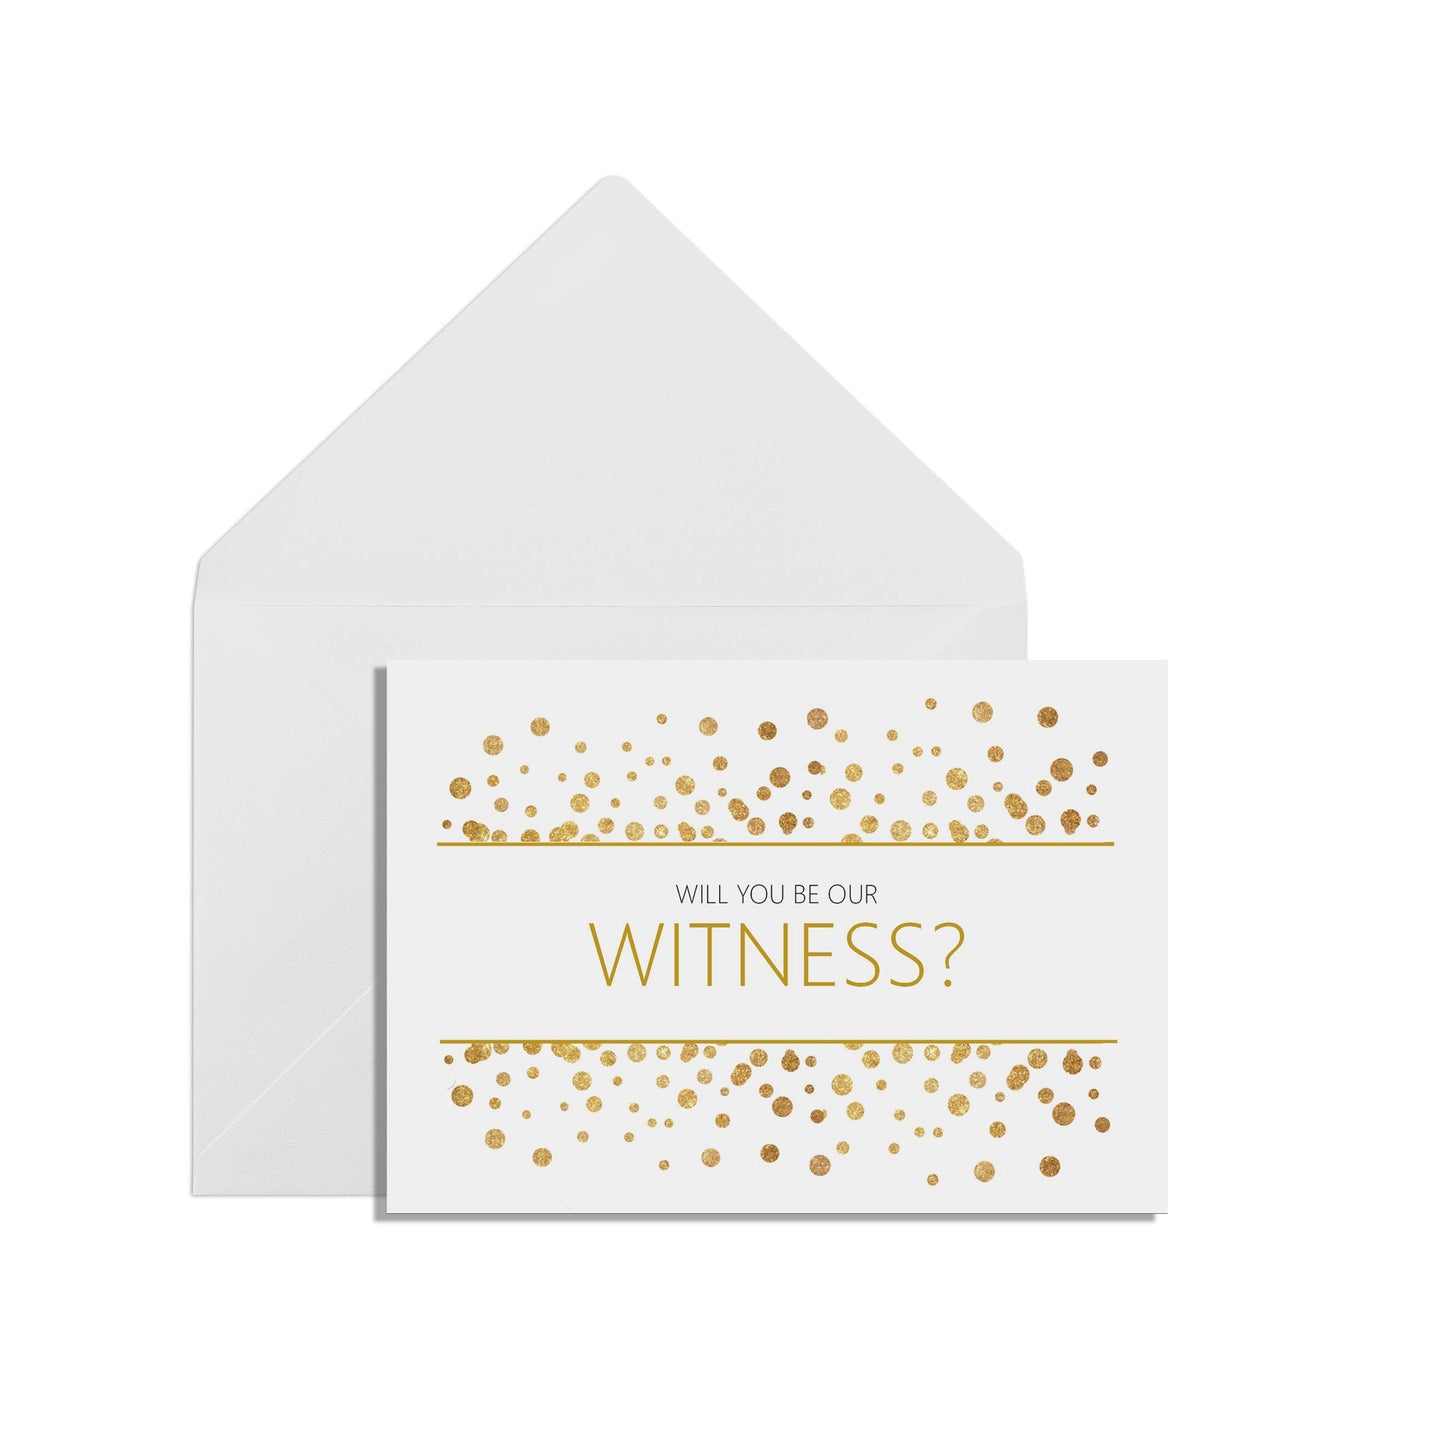 Will You Be Our Witness? A6 Gold Effect Wedding Proposal Card With A White Envelope